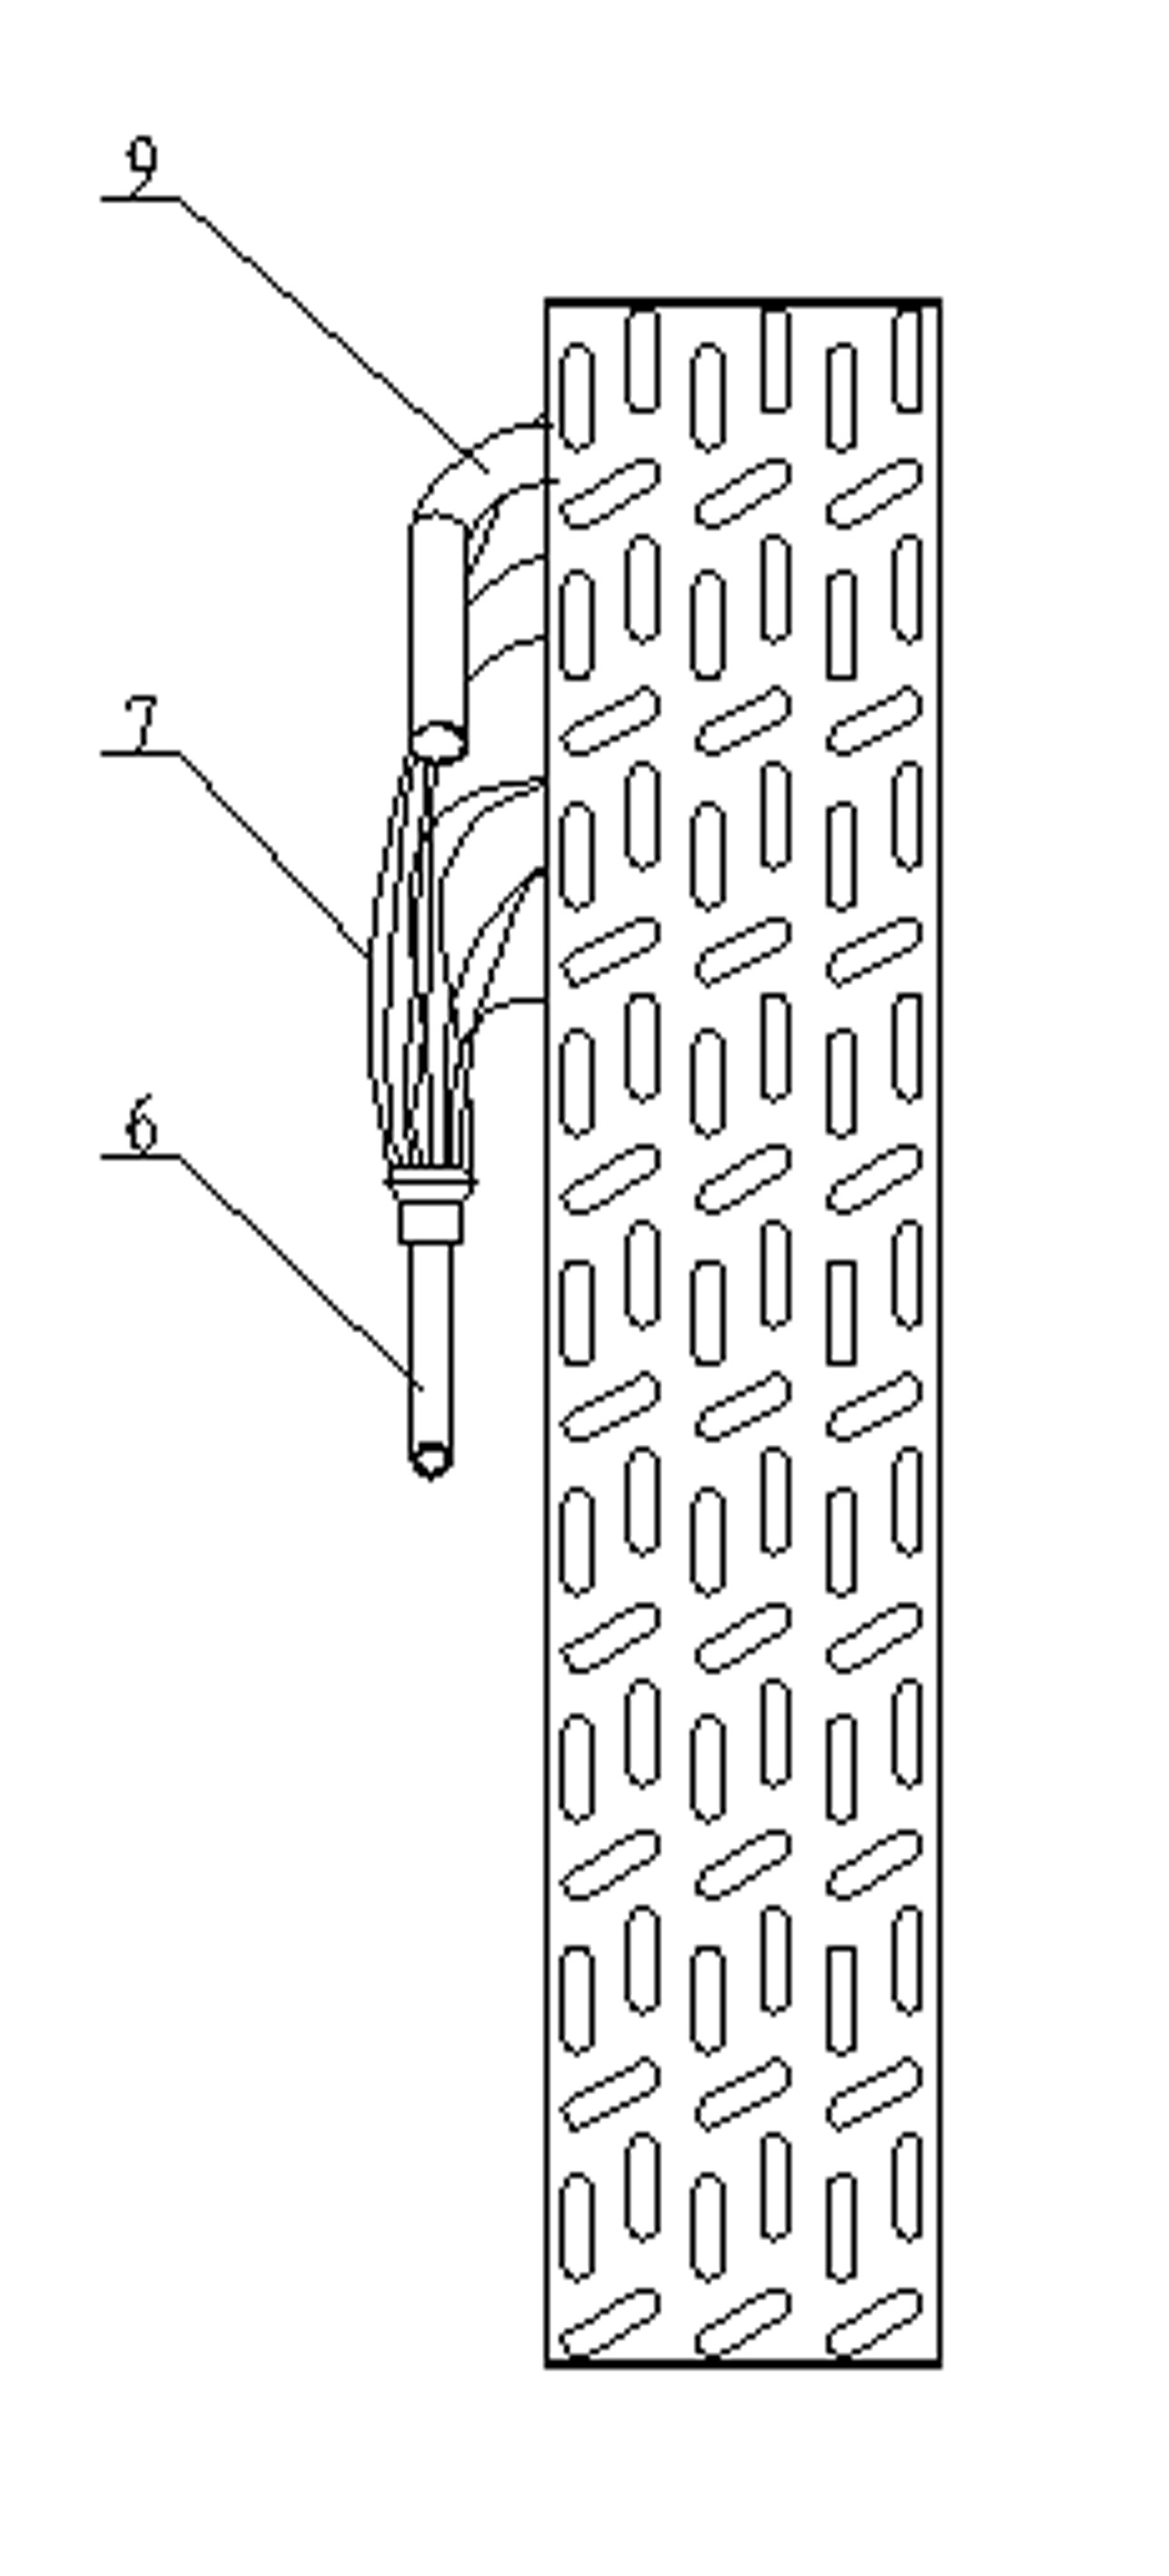 Direct type evaporator capable of automatically returning oil